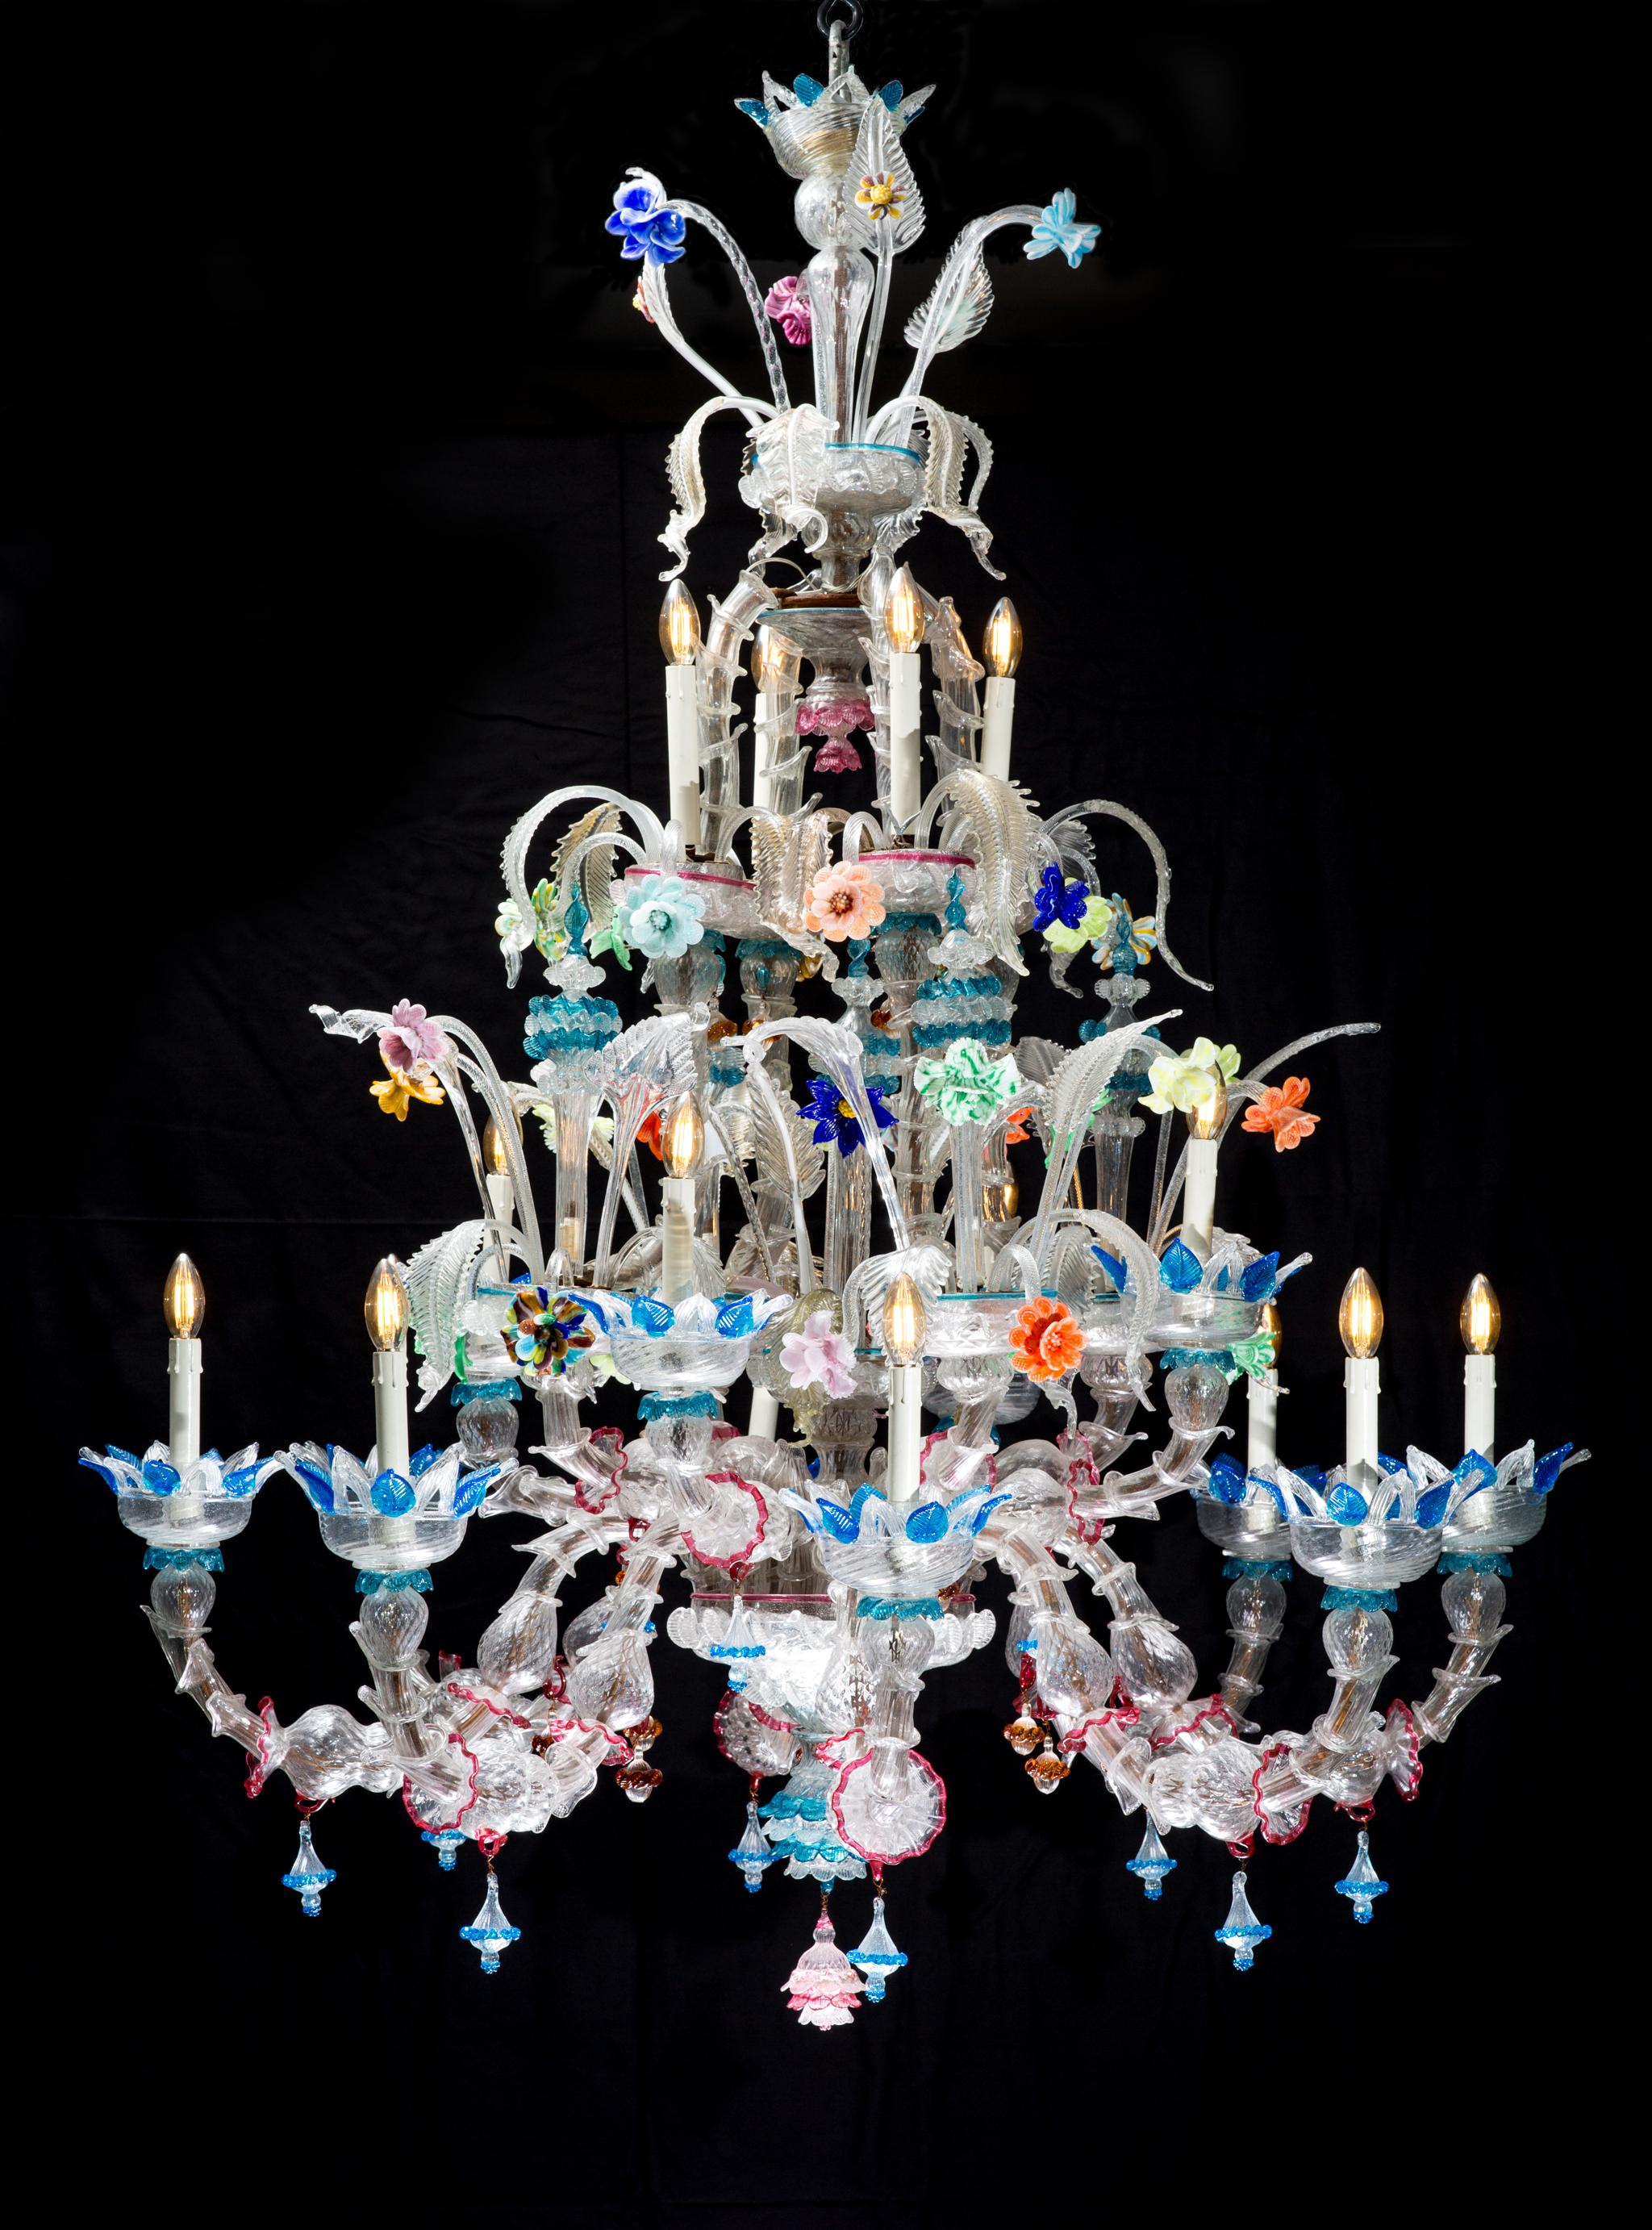 A very big colored Murano chandelier from Venetia in Italy. The chandelier was made in the mid-century period.
The chandelier has a total of 16 arms. 12 of the 16 arms have a light bulb and the remaining 4 arms have an ornated peak.
At the top of